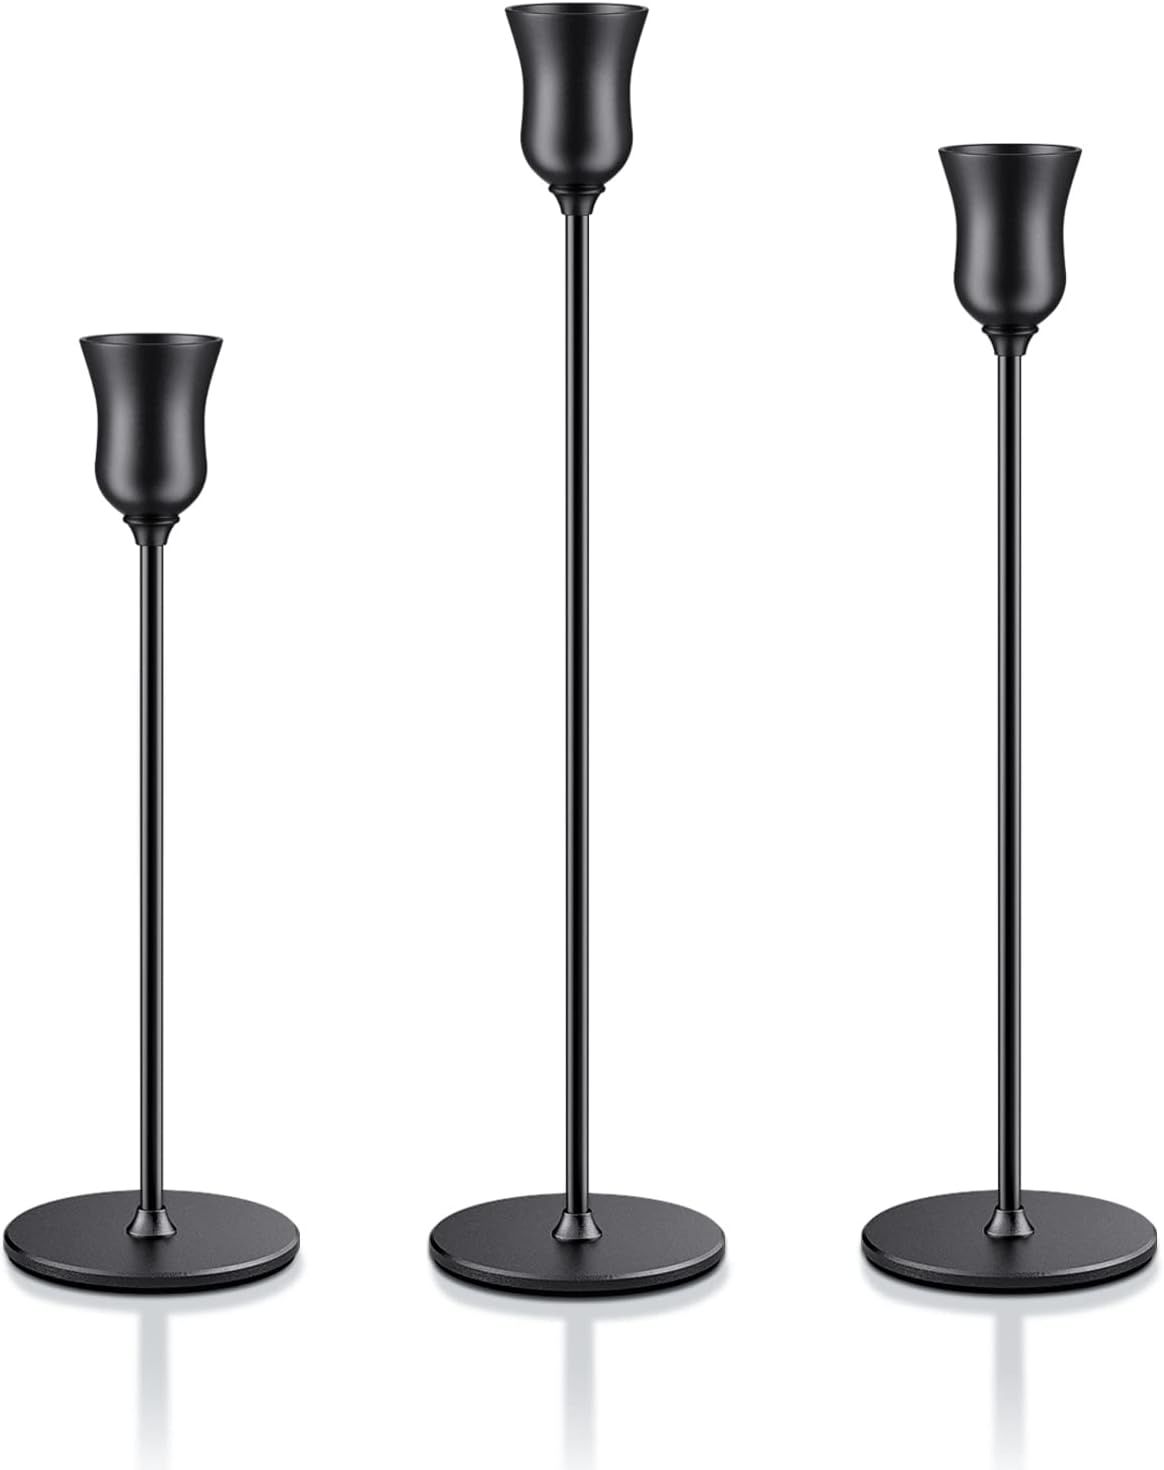 Black Candle Holders Set of 3 for Taper Candles, PChero Decorative Metal Candlesticks Stand Holde... | Amazon (US)